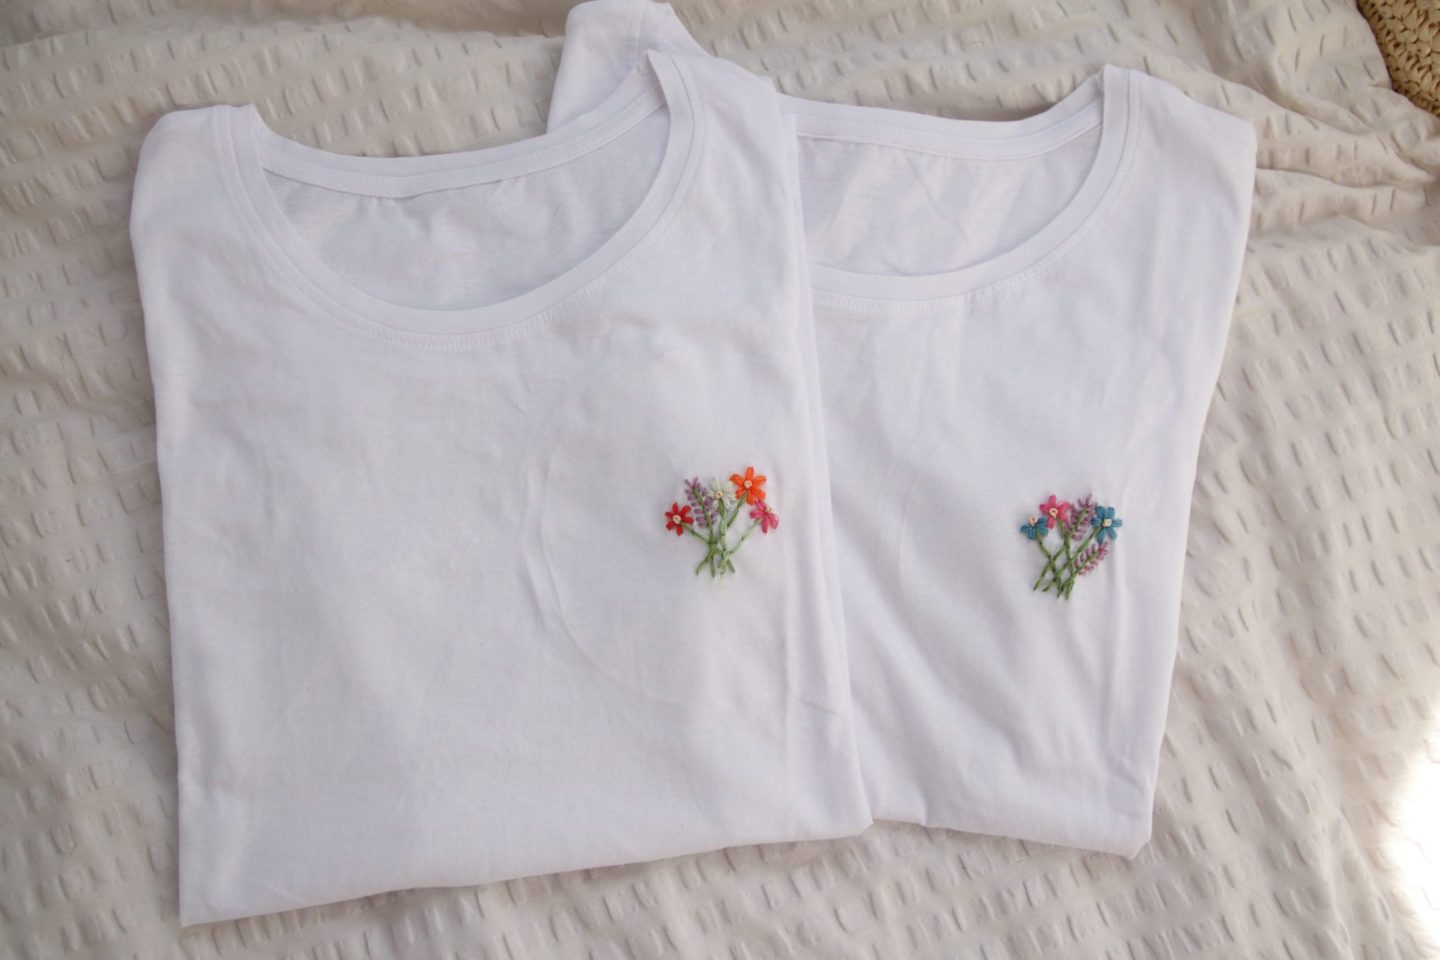 2 white t-shirts with flower bouquets hand embroidered on the left breast